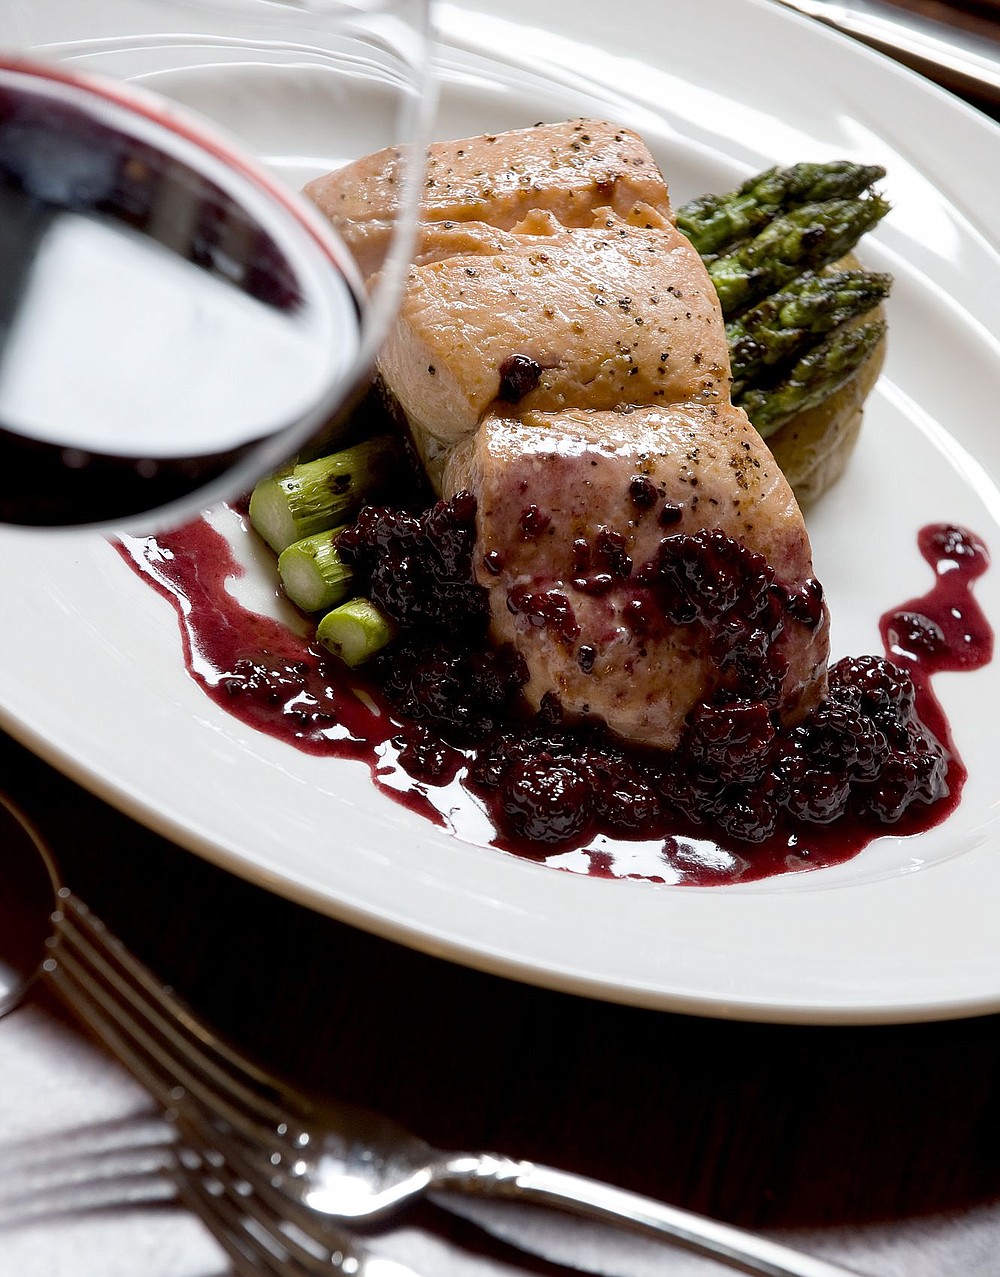 Steven Lane/The Columbian
Shelby's Coho salmon drizzled with blackberry sauce is served with fingerling potatoes, asparagus and a salad. One diner called it &quot;magic on a plate.&quot;